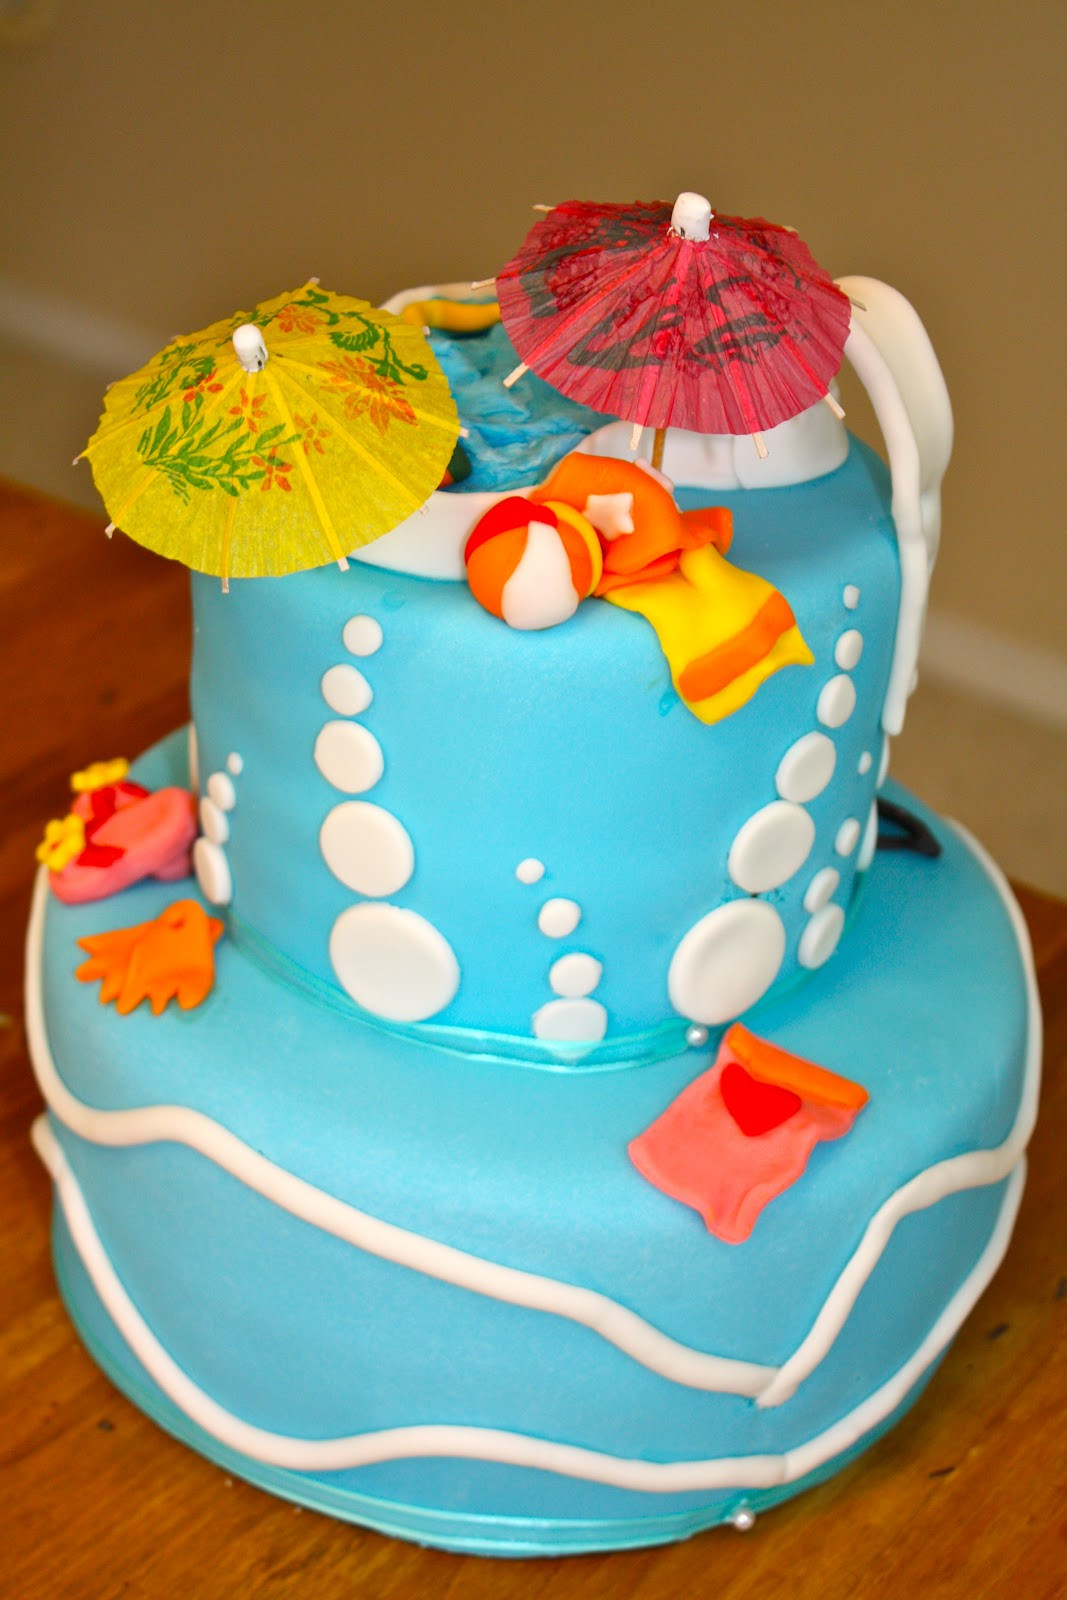 Pool Party Cakes Ideas
 bumble cakes Summer Pool Party Birthday Cake